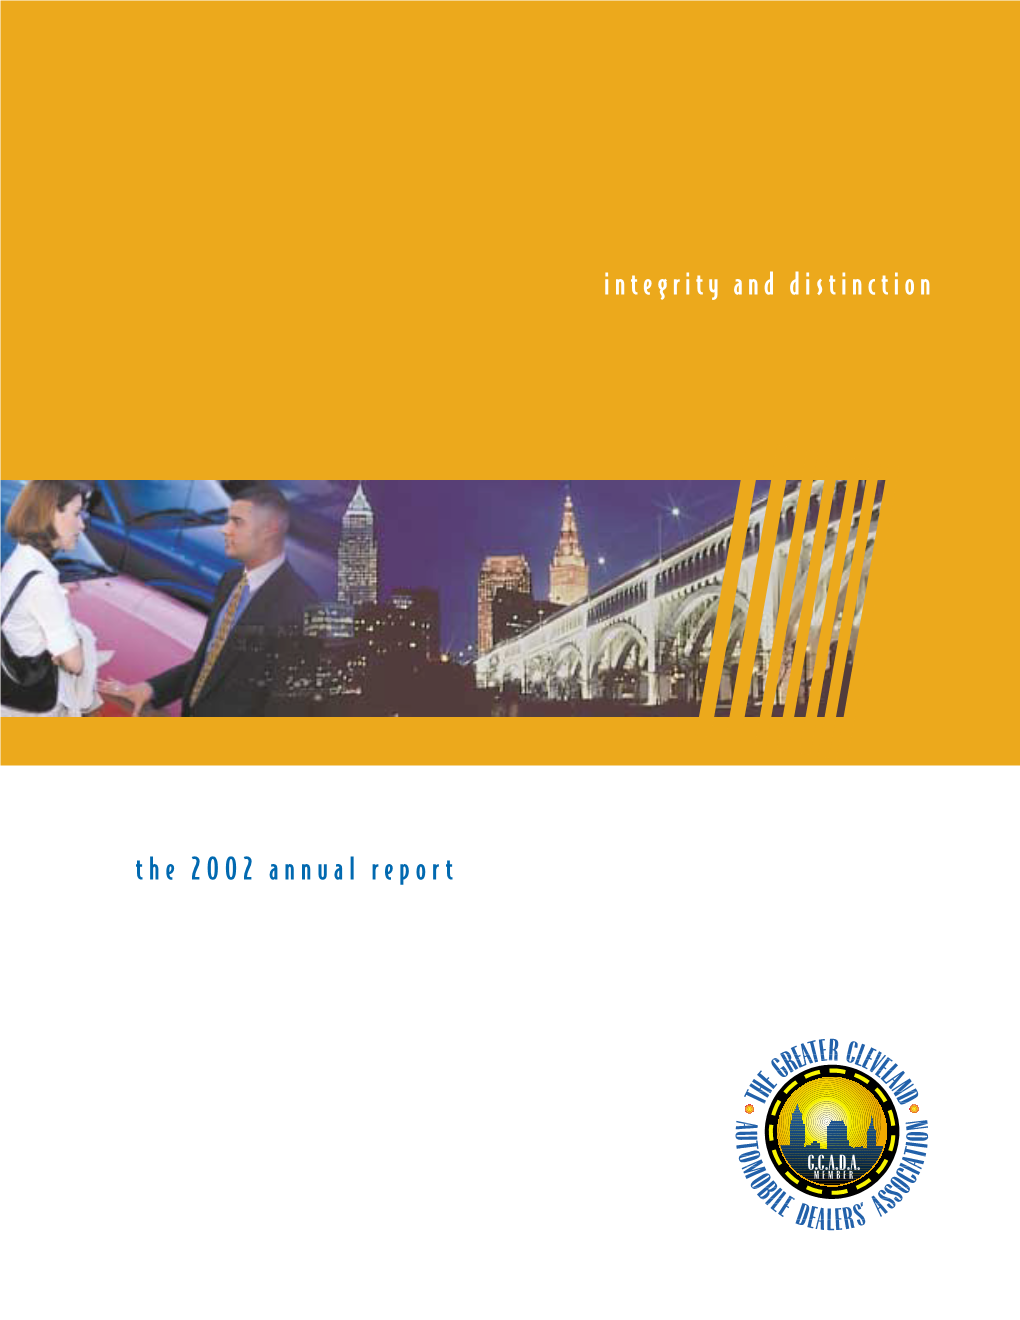 The 2002 Annual Report Integrity and Distinction